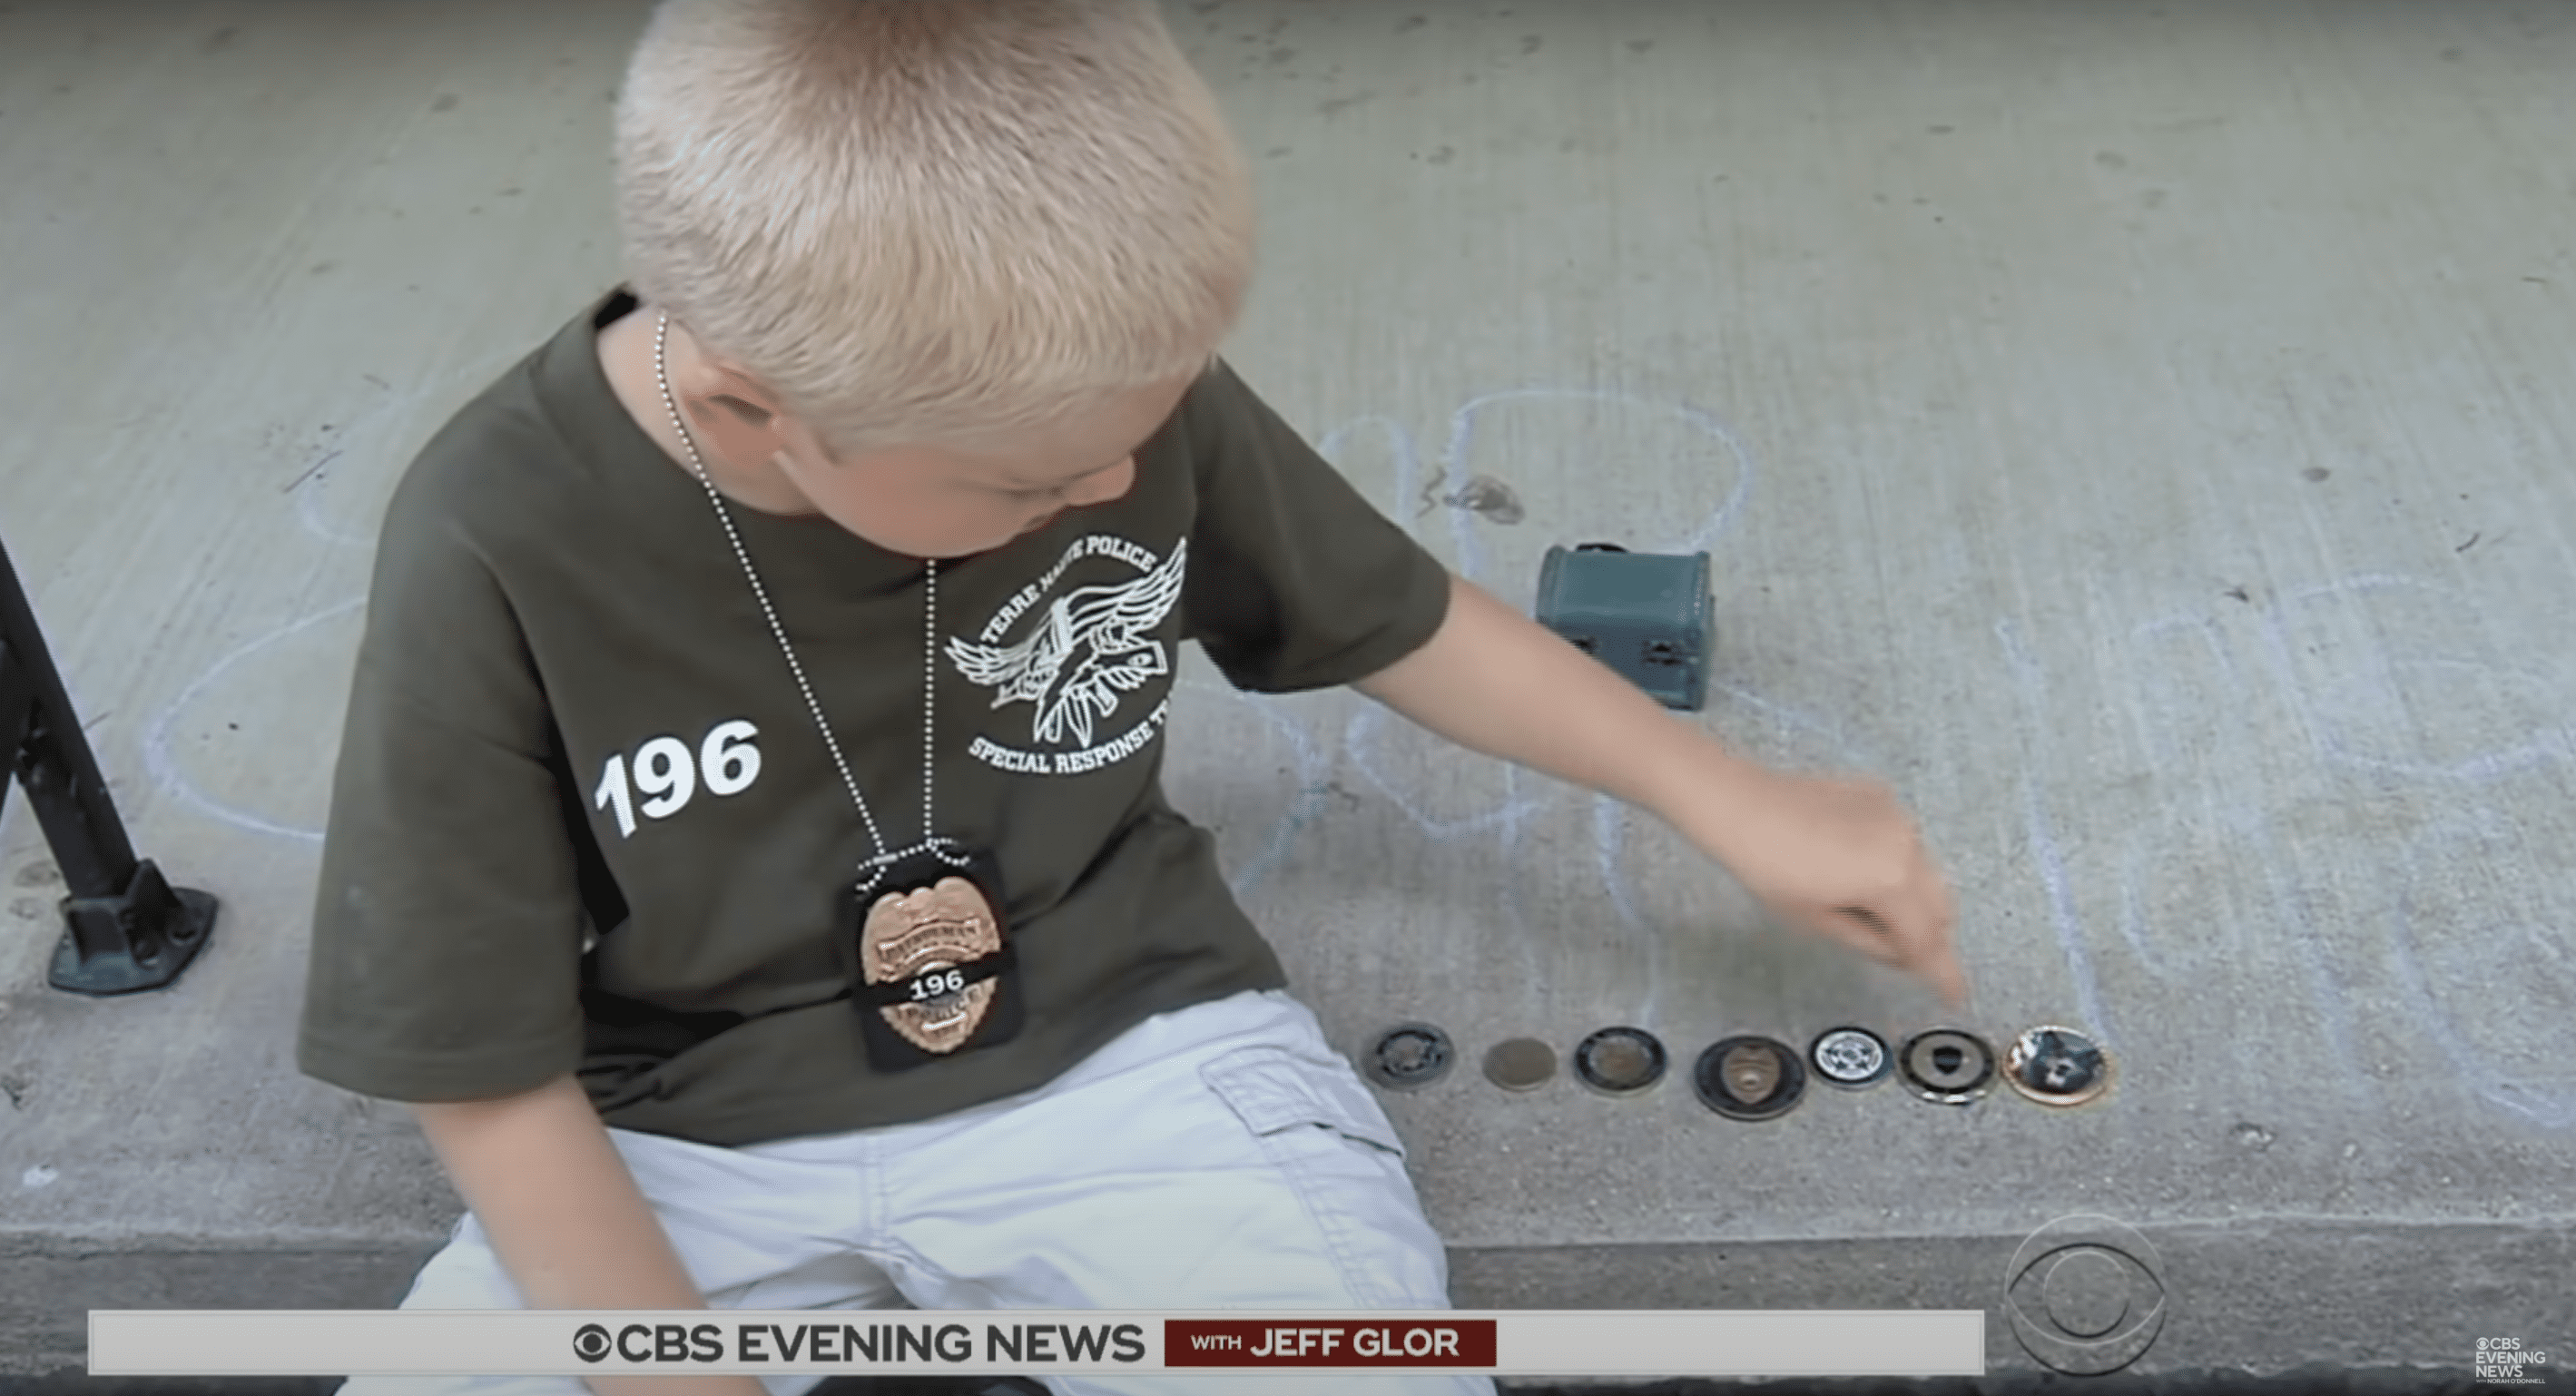 Dakota Pitts shows his challenge coins collection | Source: YouTube.com/CBS Evening News